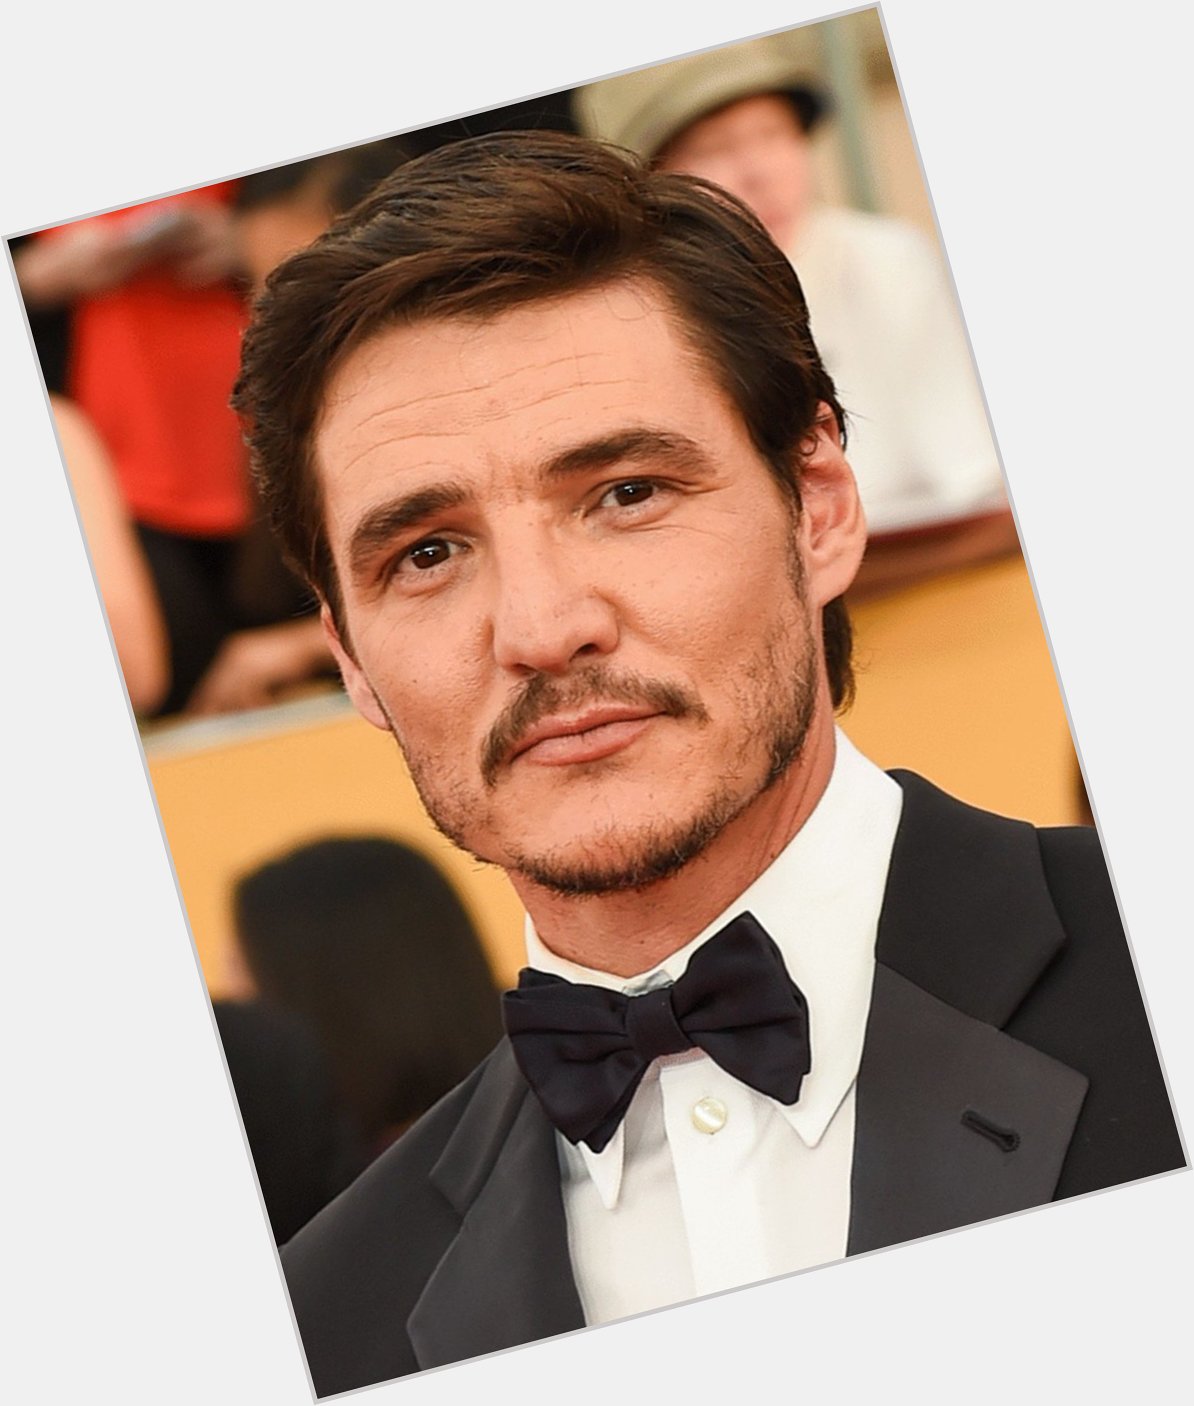 Happy birthday Pedro Pascal Use to watch more his works from
anywhere 